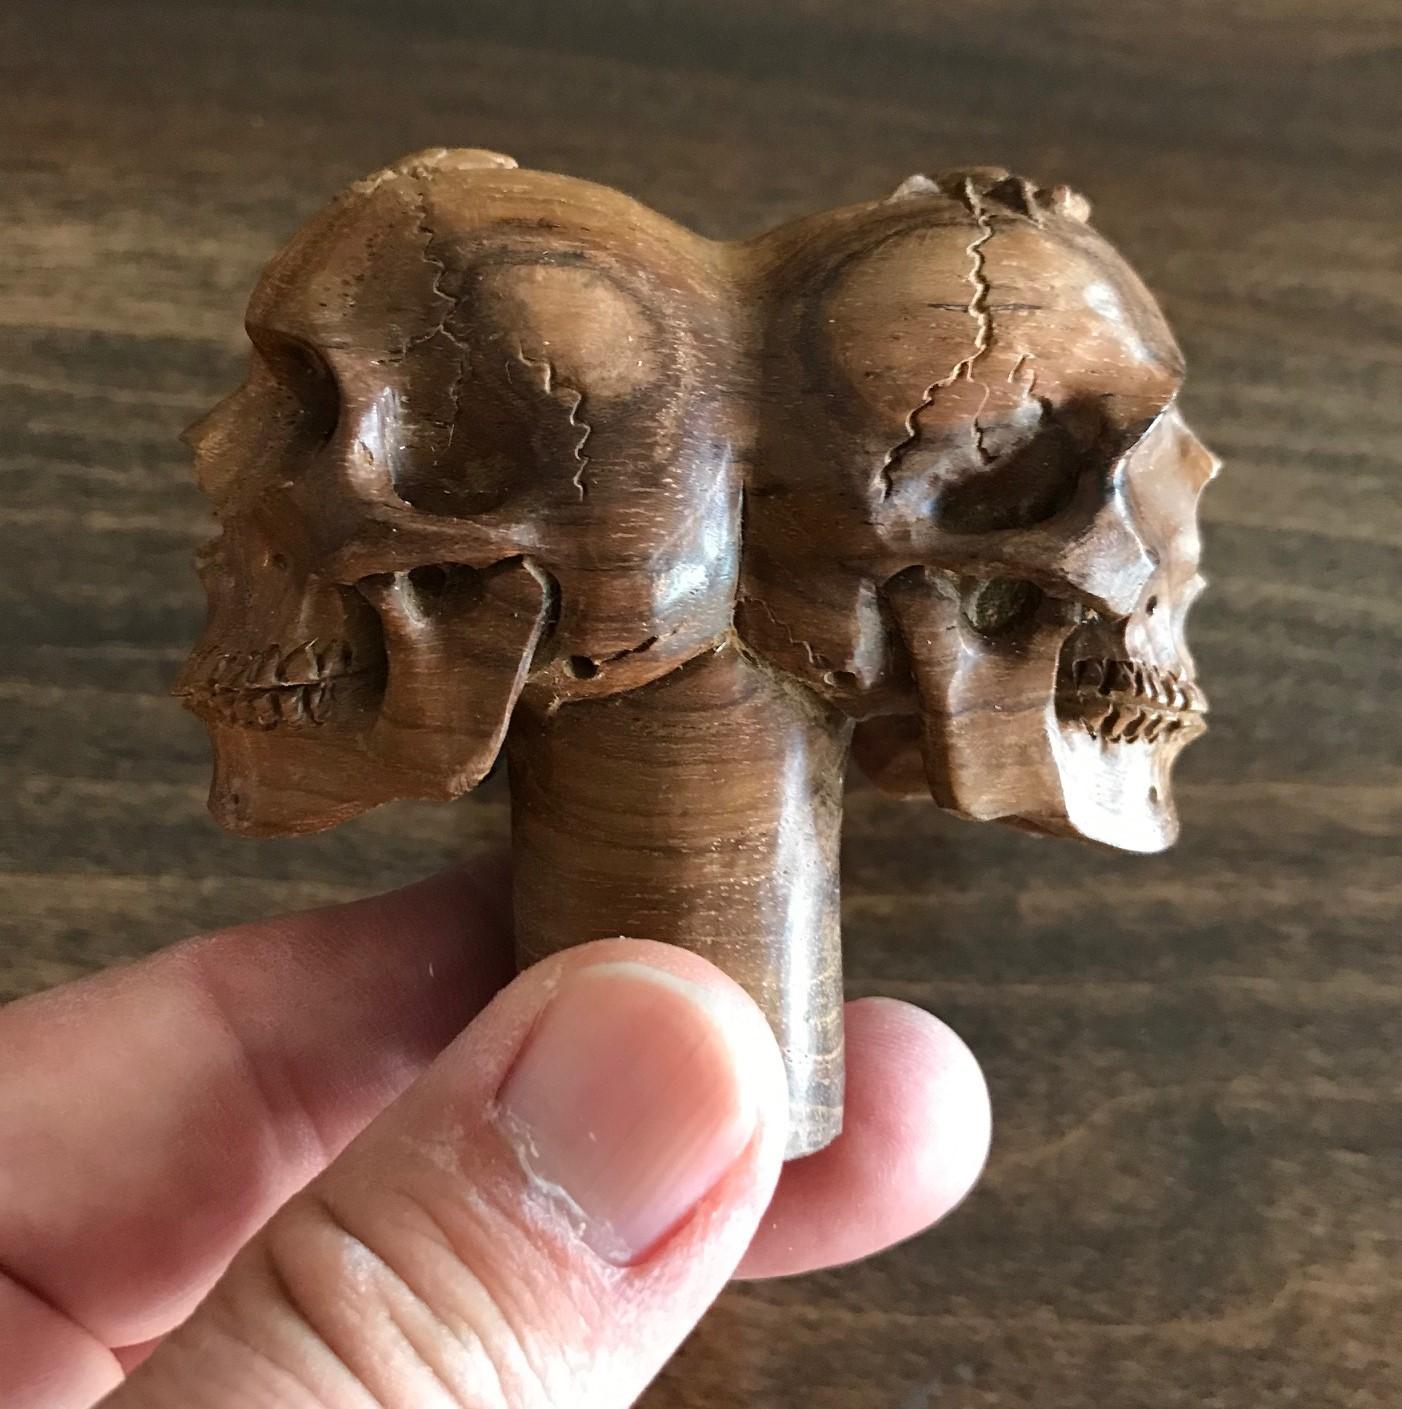 A fantastic and wonderfully hand carved piece. These smiling, mischievous skulls are hand carved in very Fine detail. Would be the crown jewel of any walking stick collection once attached to the cane. Truly a unique and one of a kind